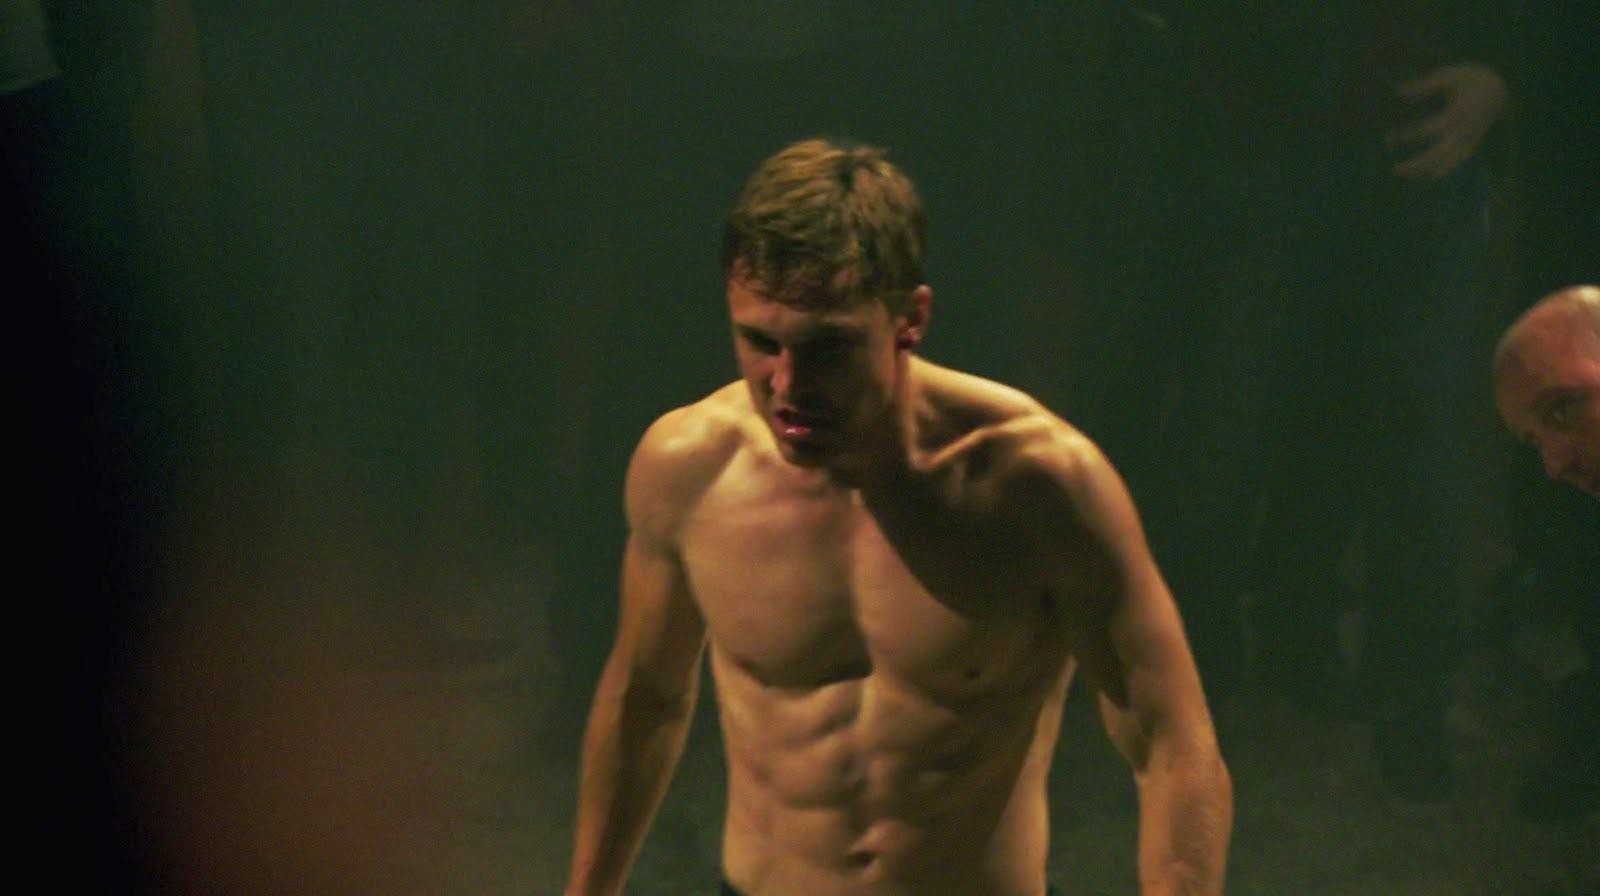 William Moseley in "The Royals" (Ep. 